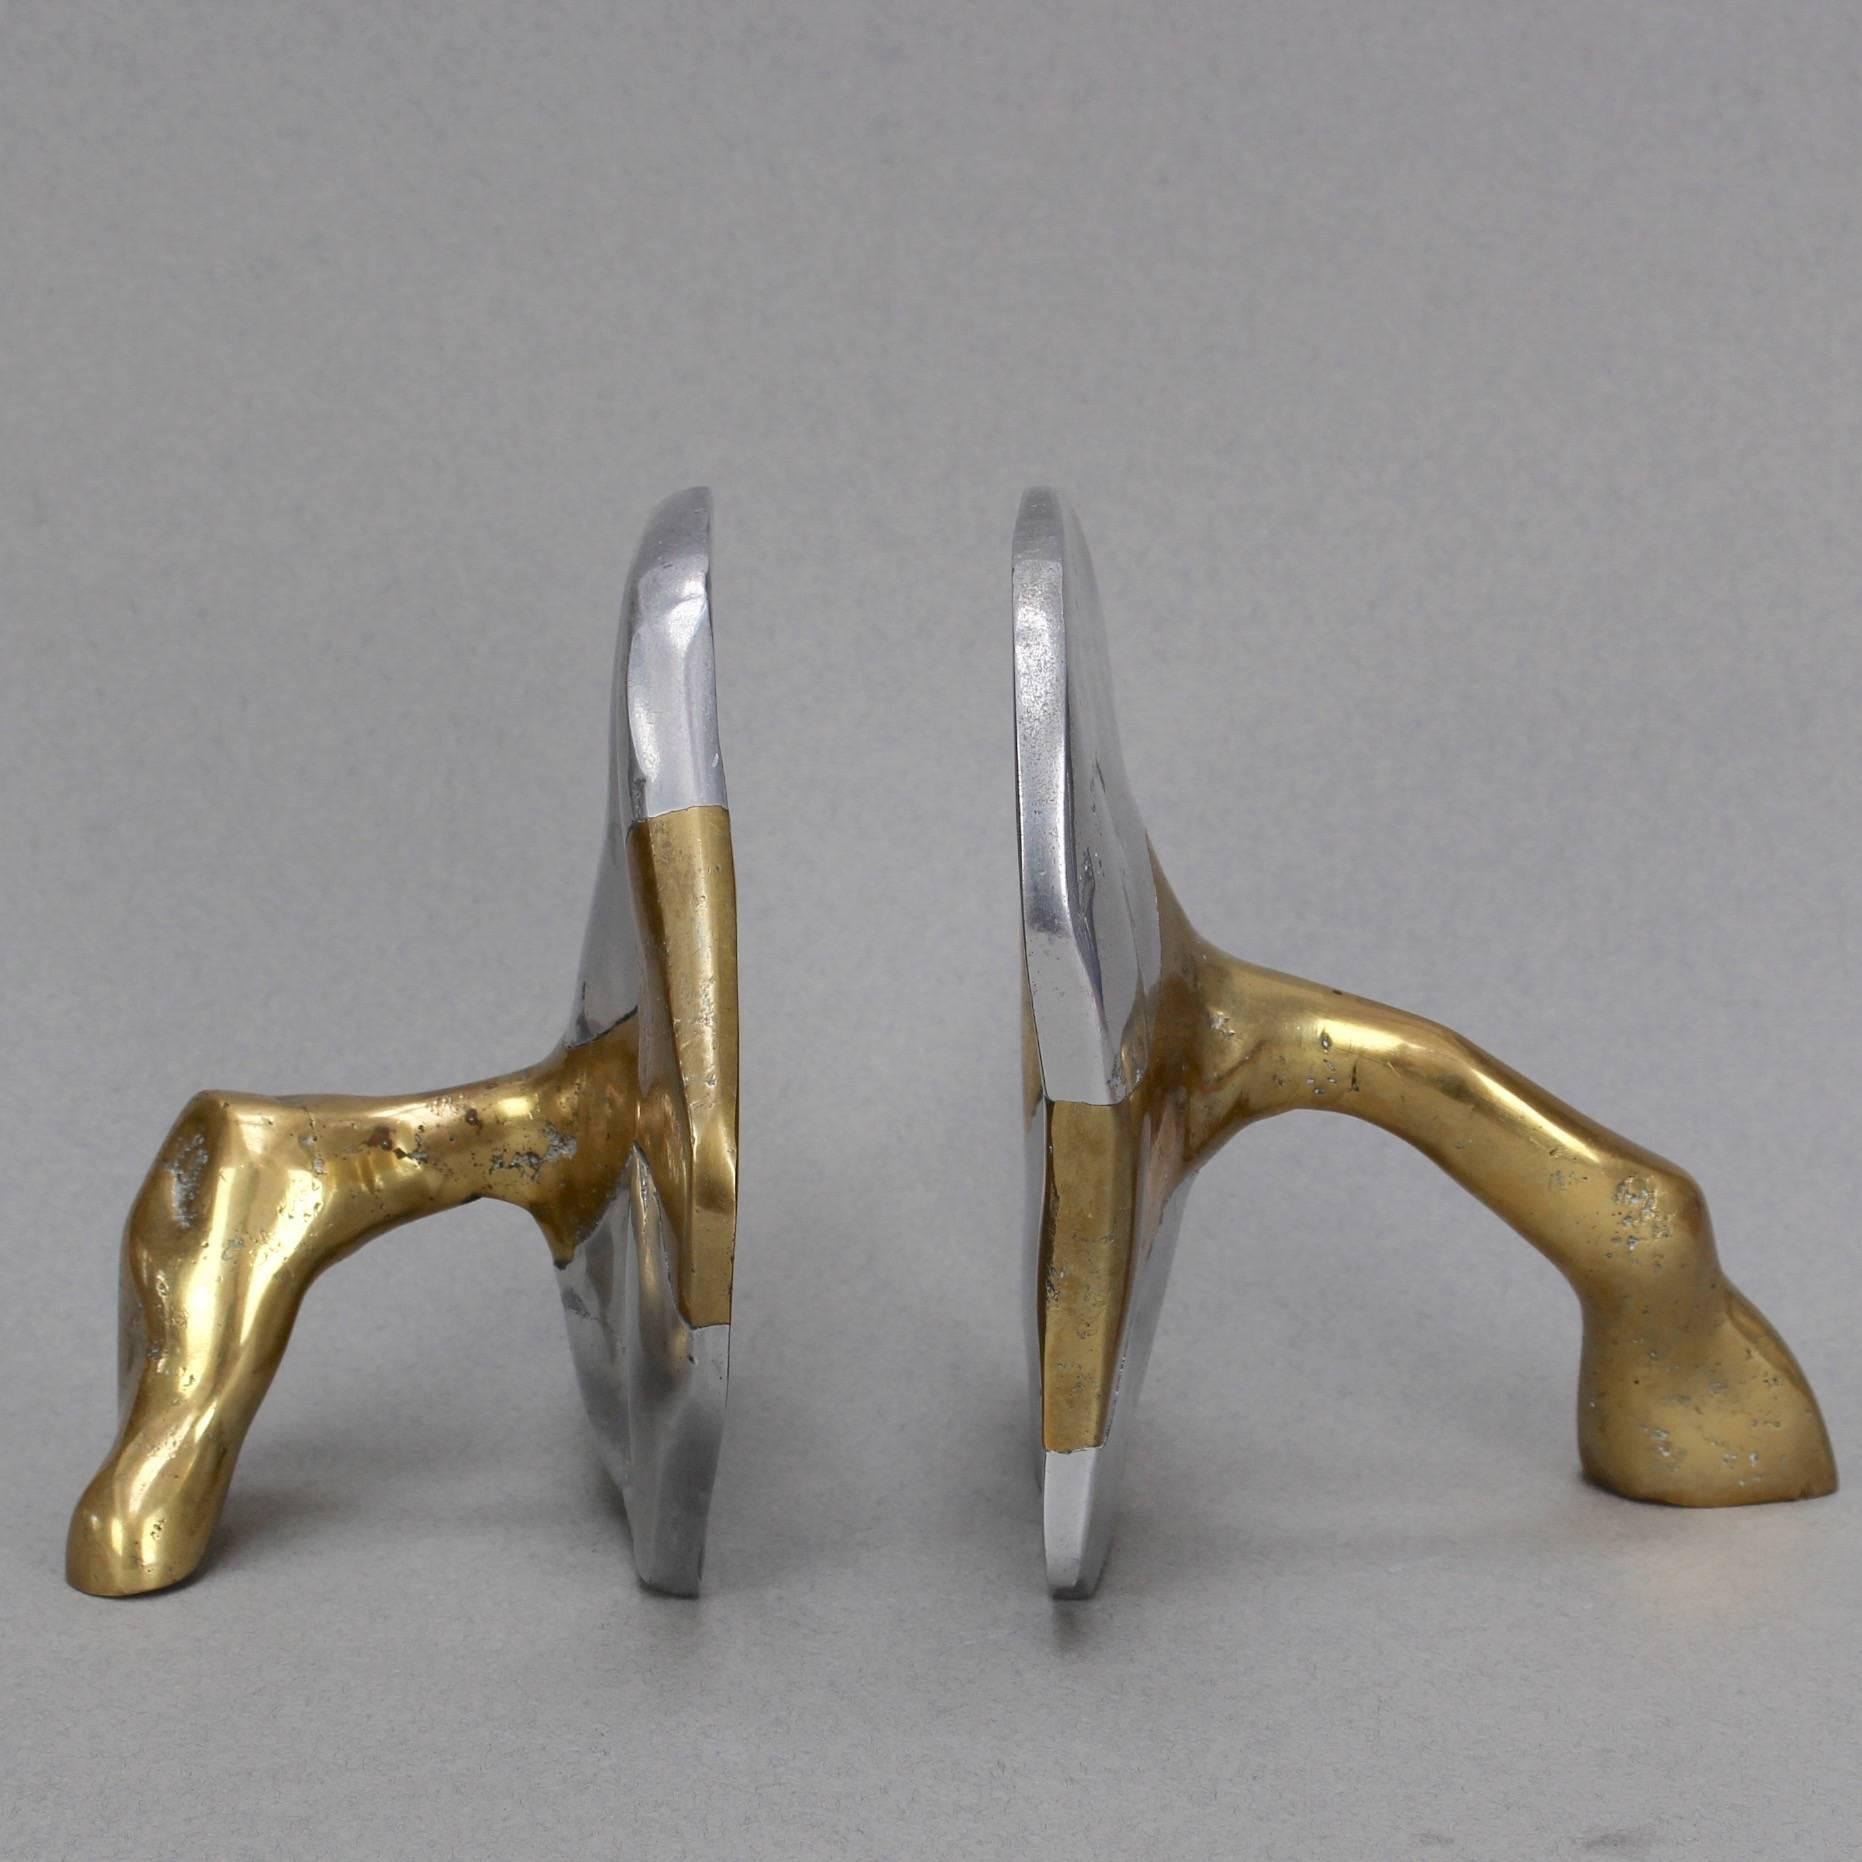 Brass and aluminium Brutalist style bookends by David Marshall, circa 1970s. These are weighty, cratered and raw as if plucked right from nature. The brass support pieces meld with the aluminium seamlessly to form the bookends. Standing alone, these